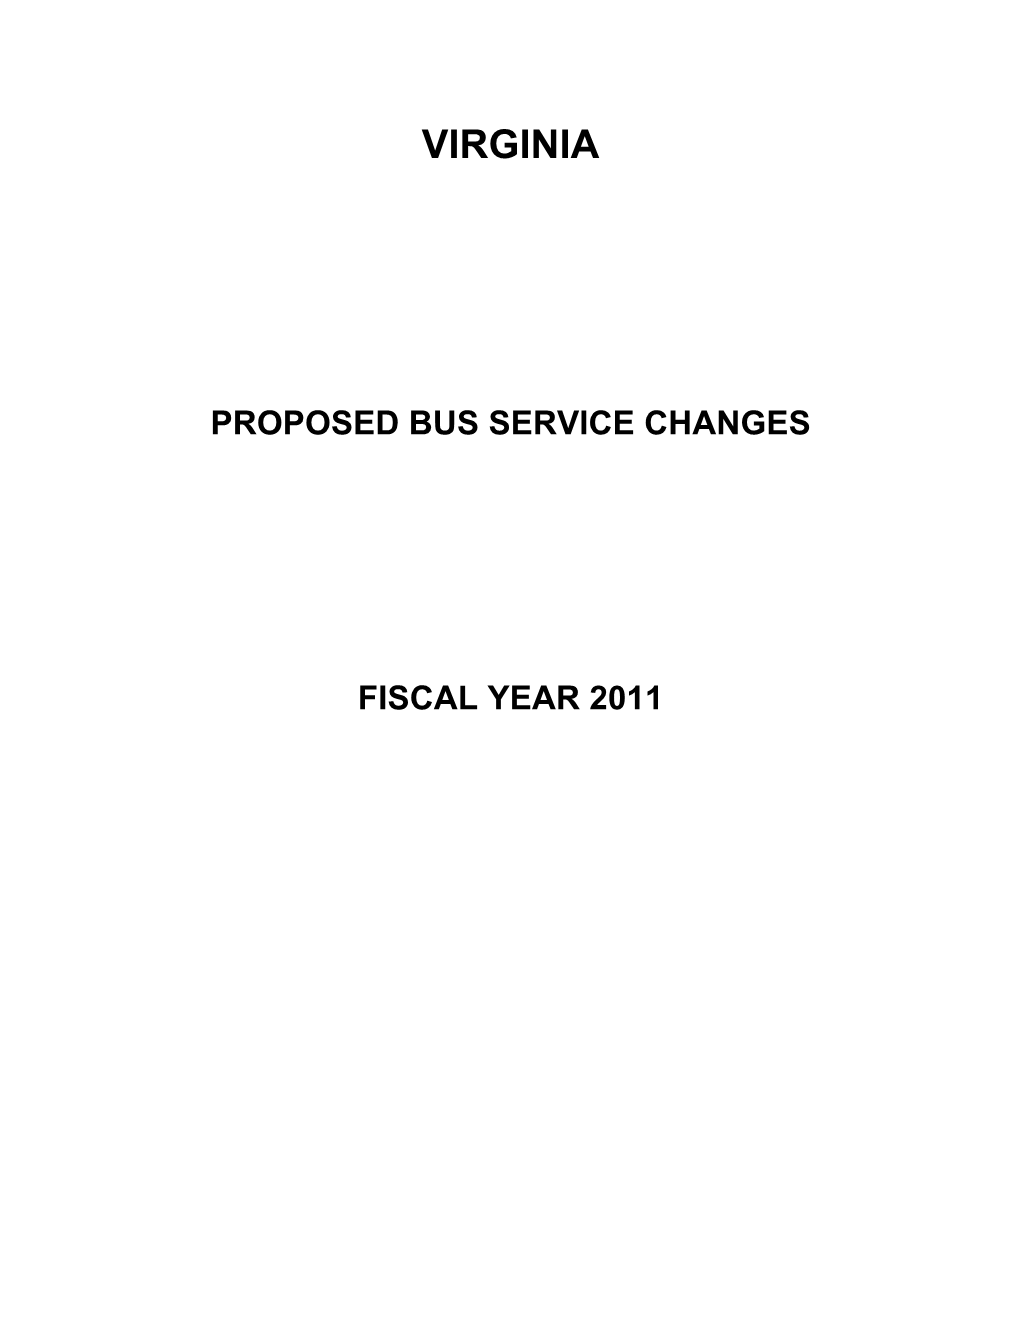 Proposed Bus Service Changes